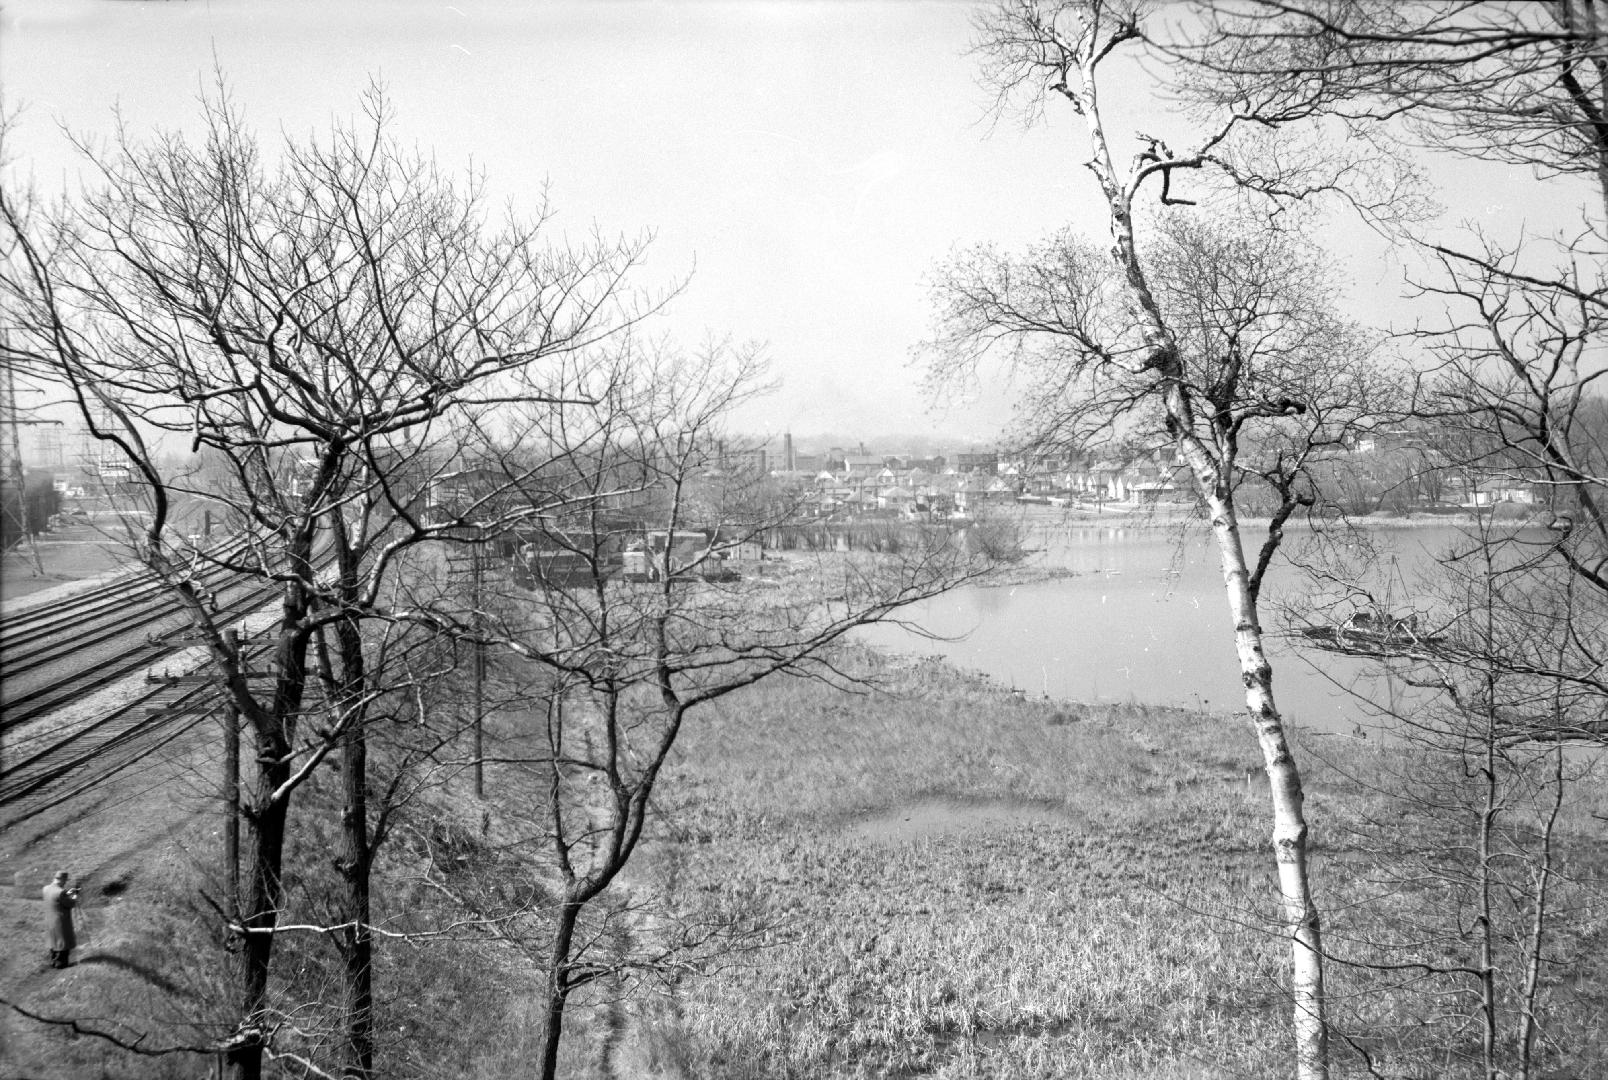 High Park, Grenadier Pond, looking west along site of The Queensway